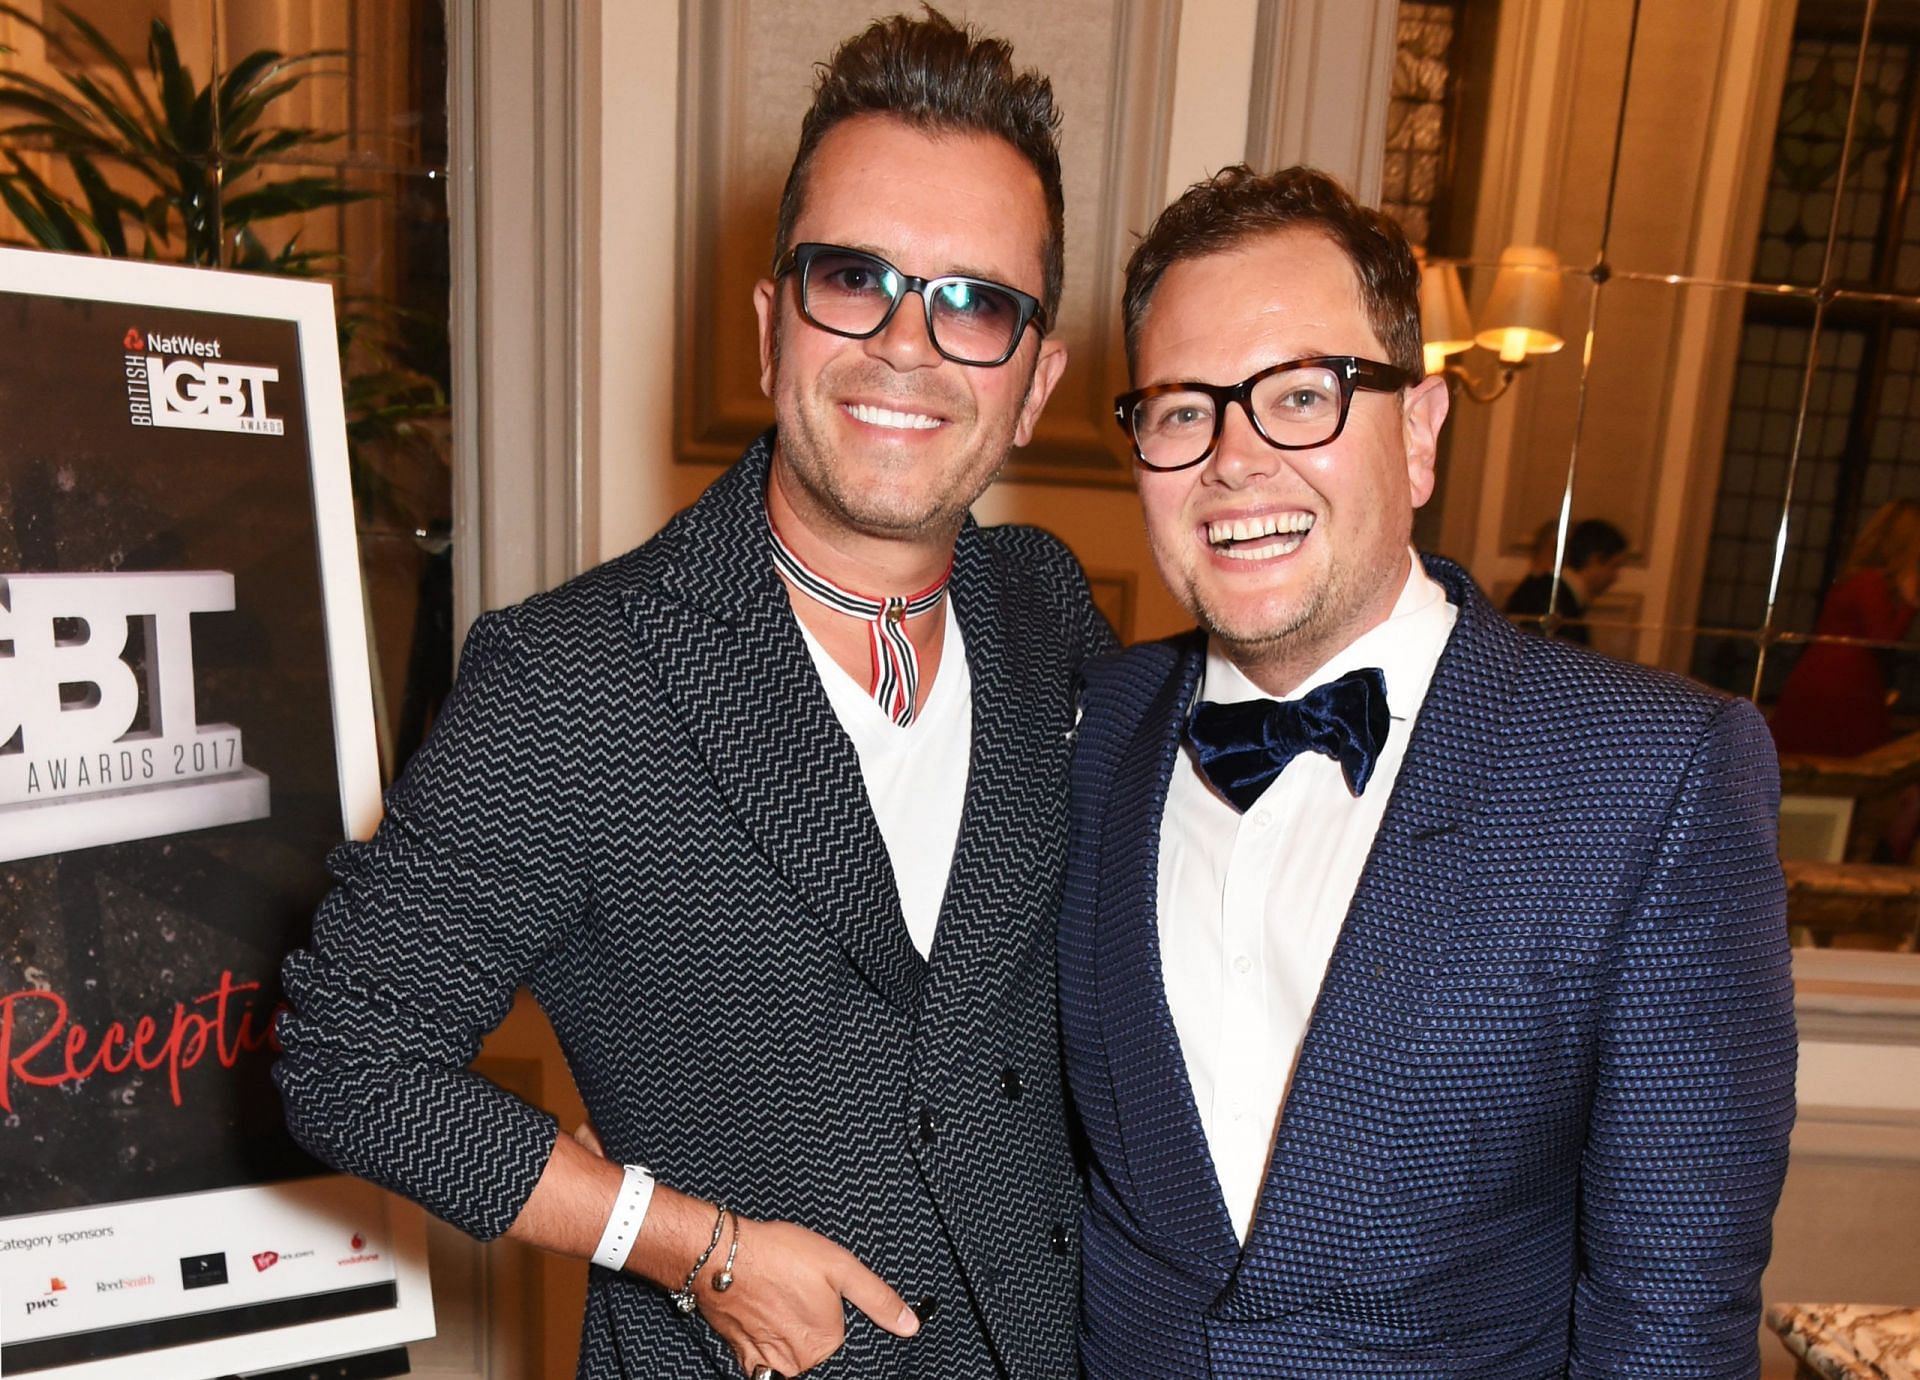 Alan Carr and with now estranged husband Paul Drayton (Image via David M. Bennet/Getty Images)